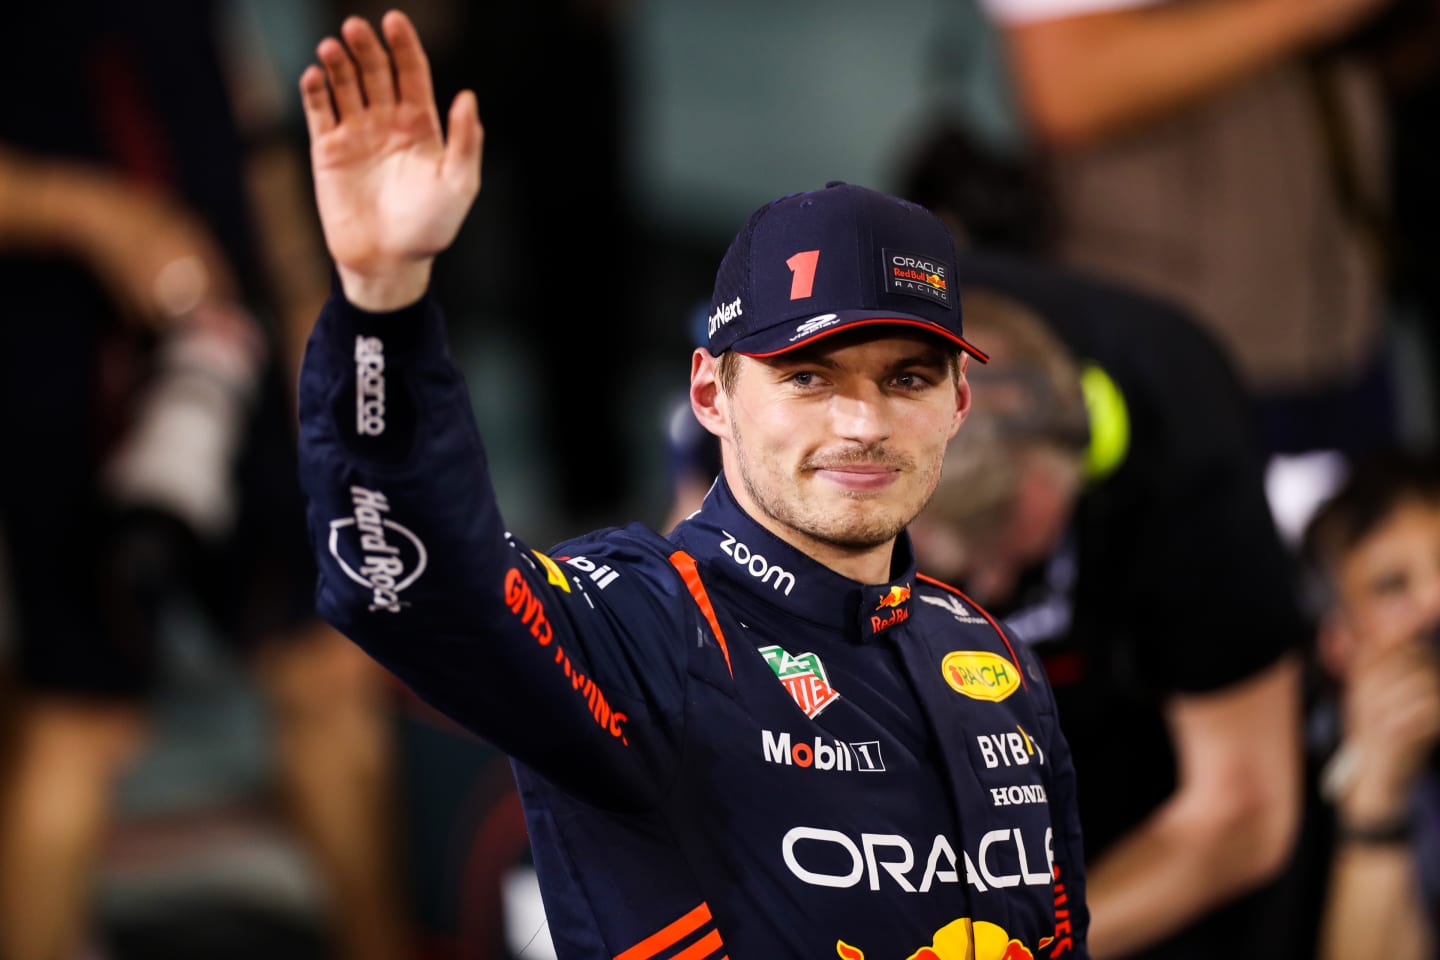 BAHRAIN, BAHRAIN - MARCH 04: Max Verstappen of Red Bull Racing and The Netherlands waves to the